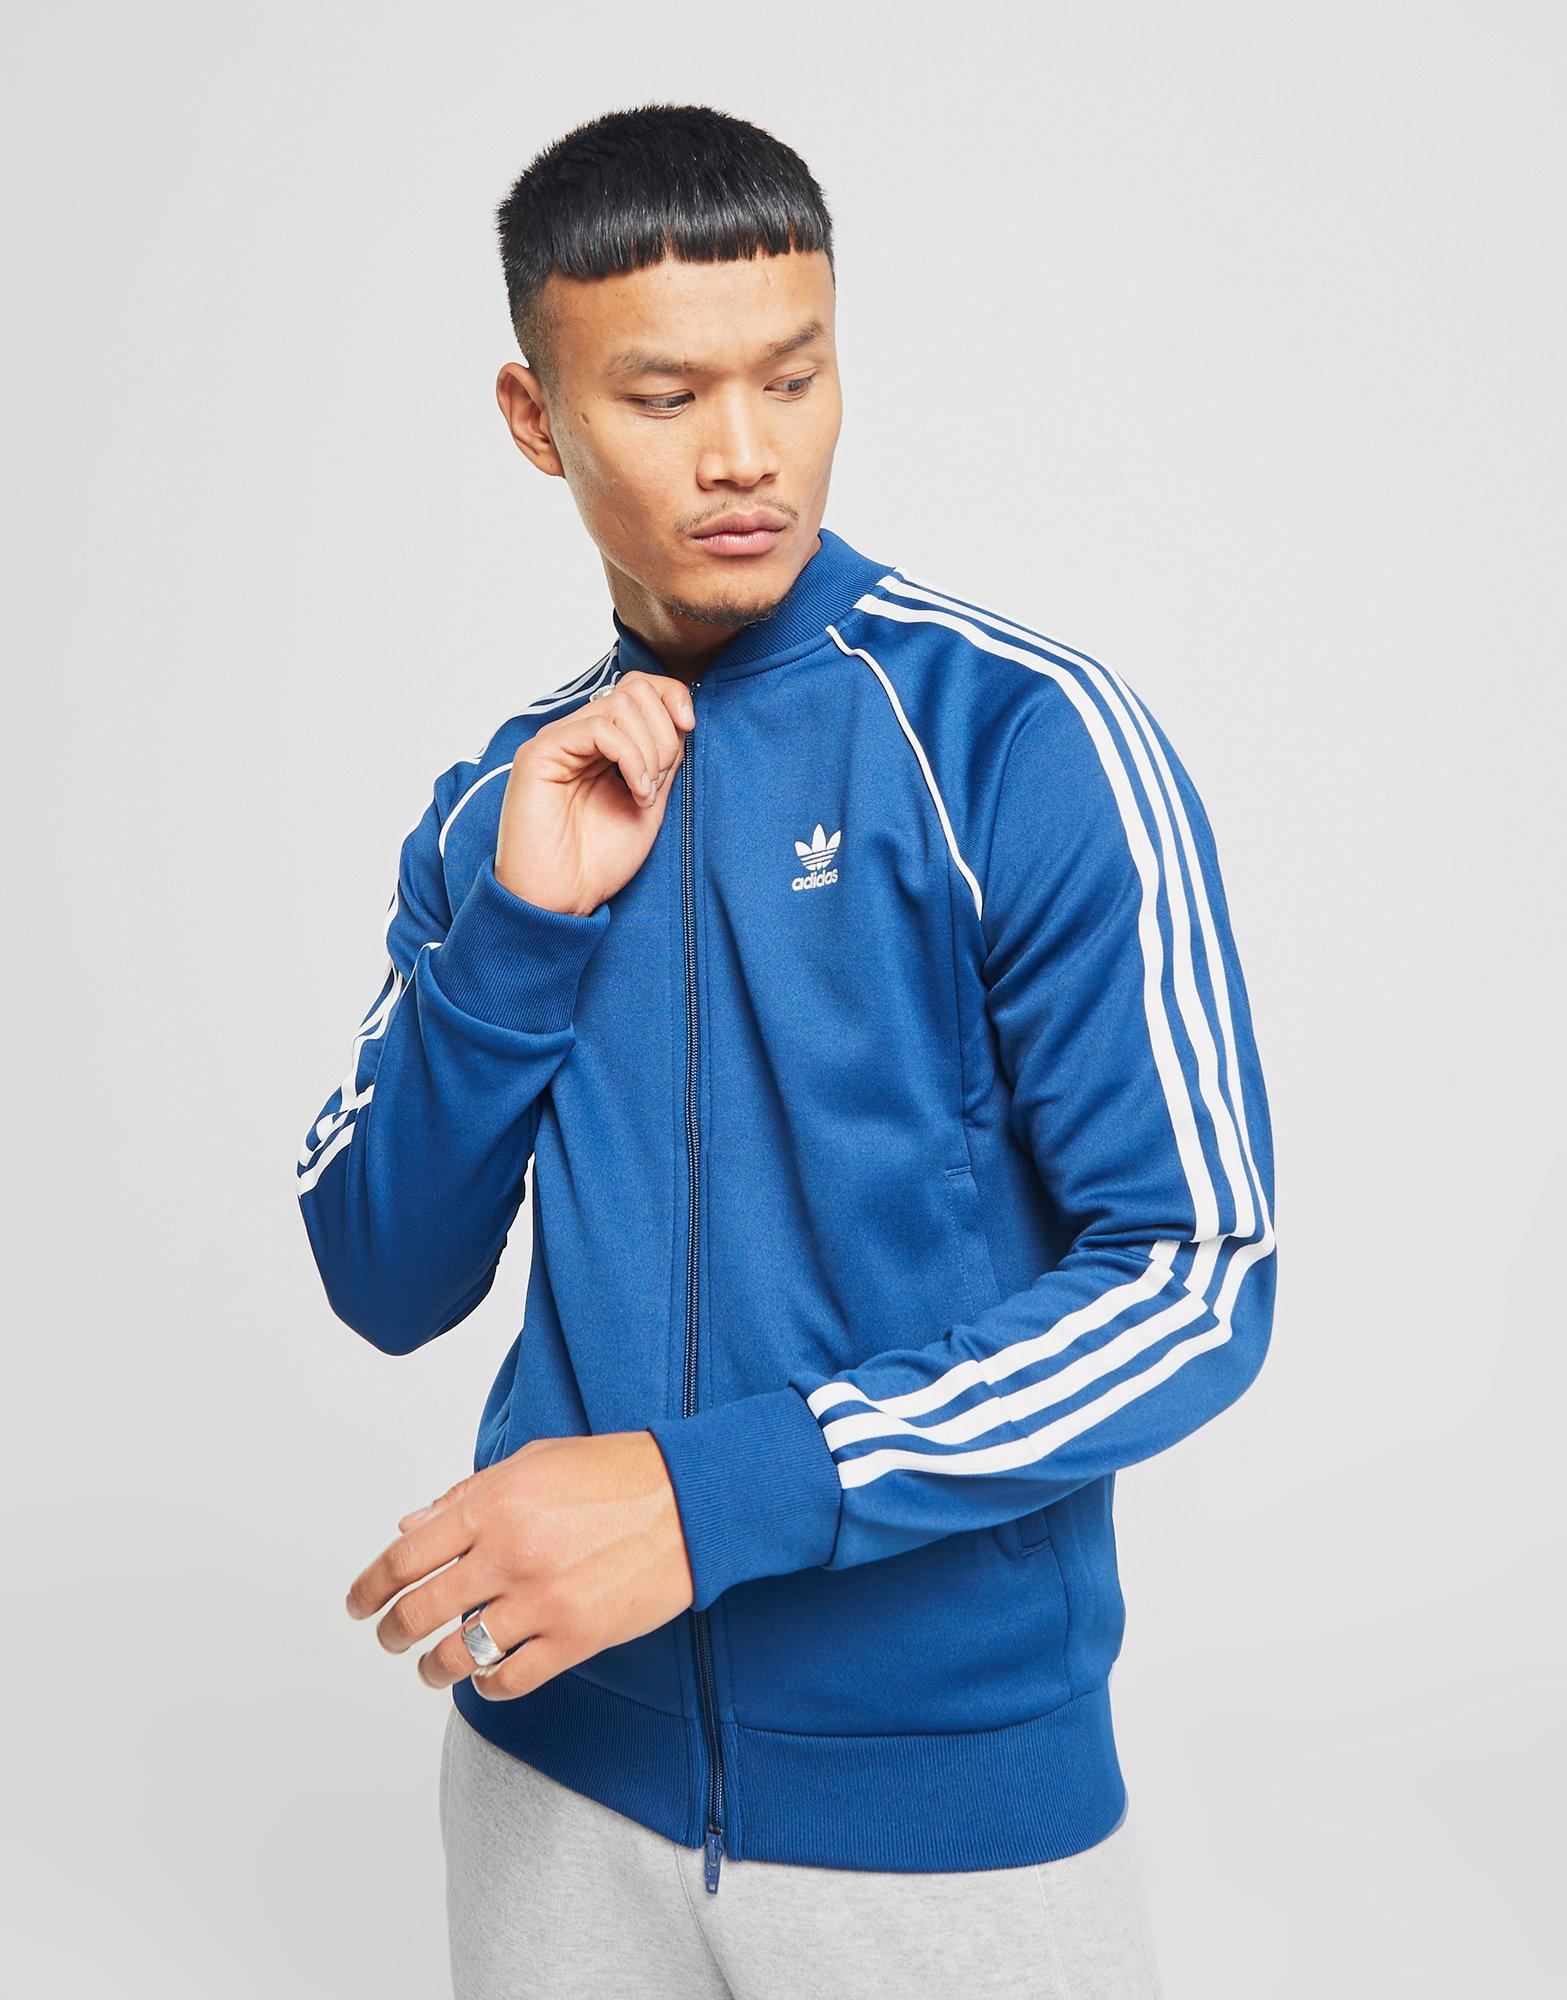 adidas classic tracksuit top